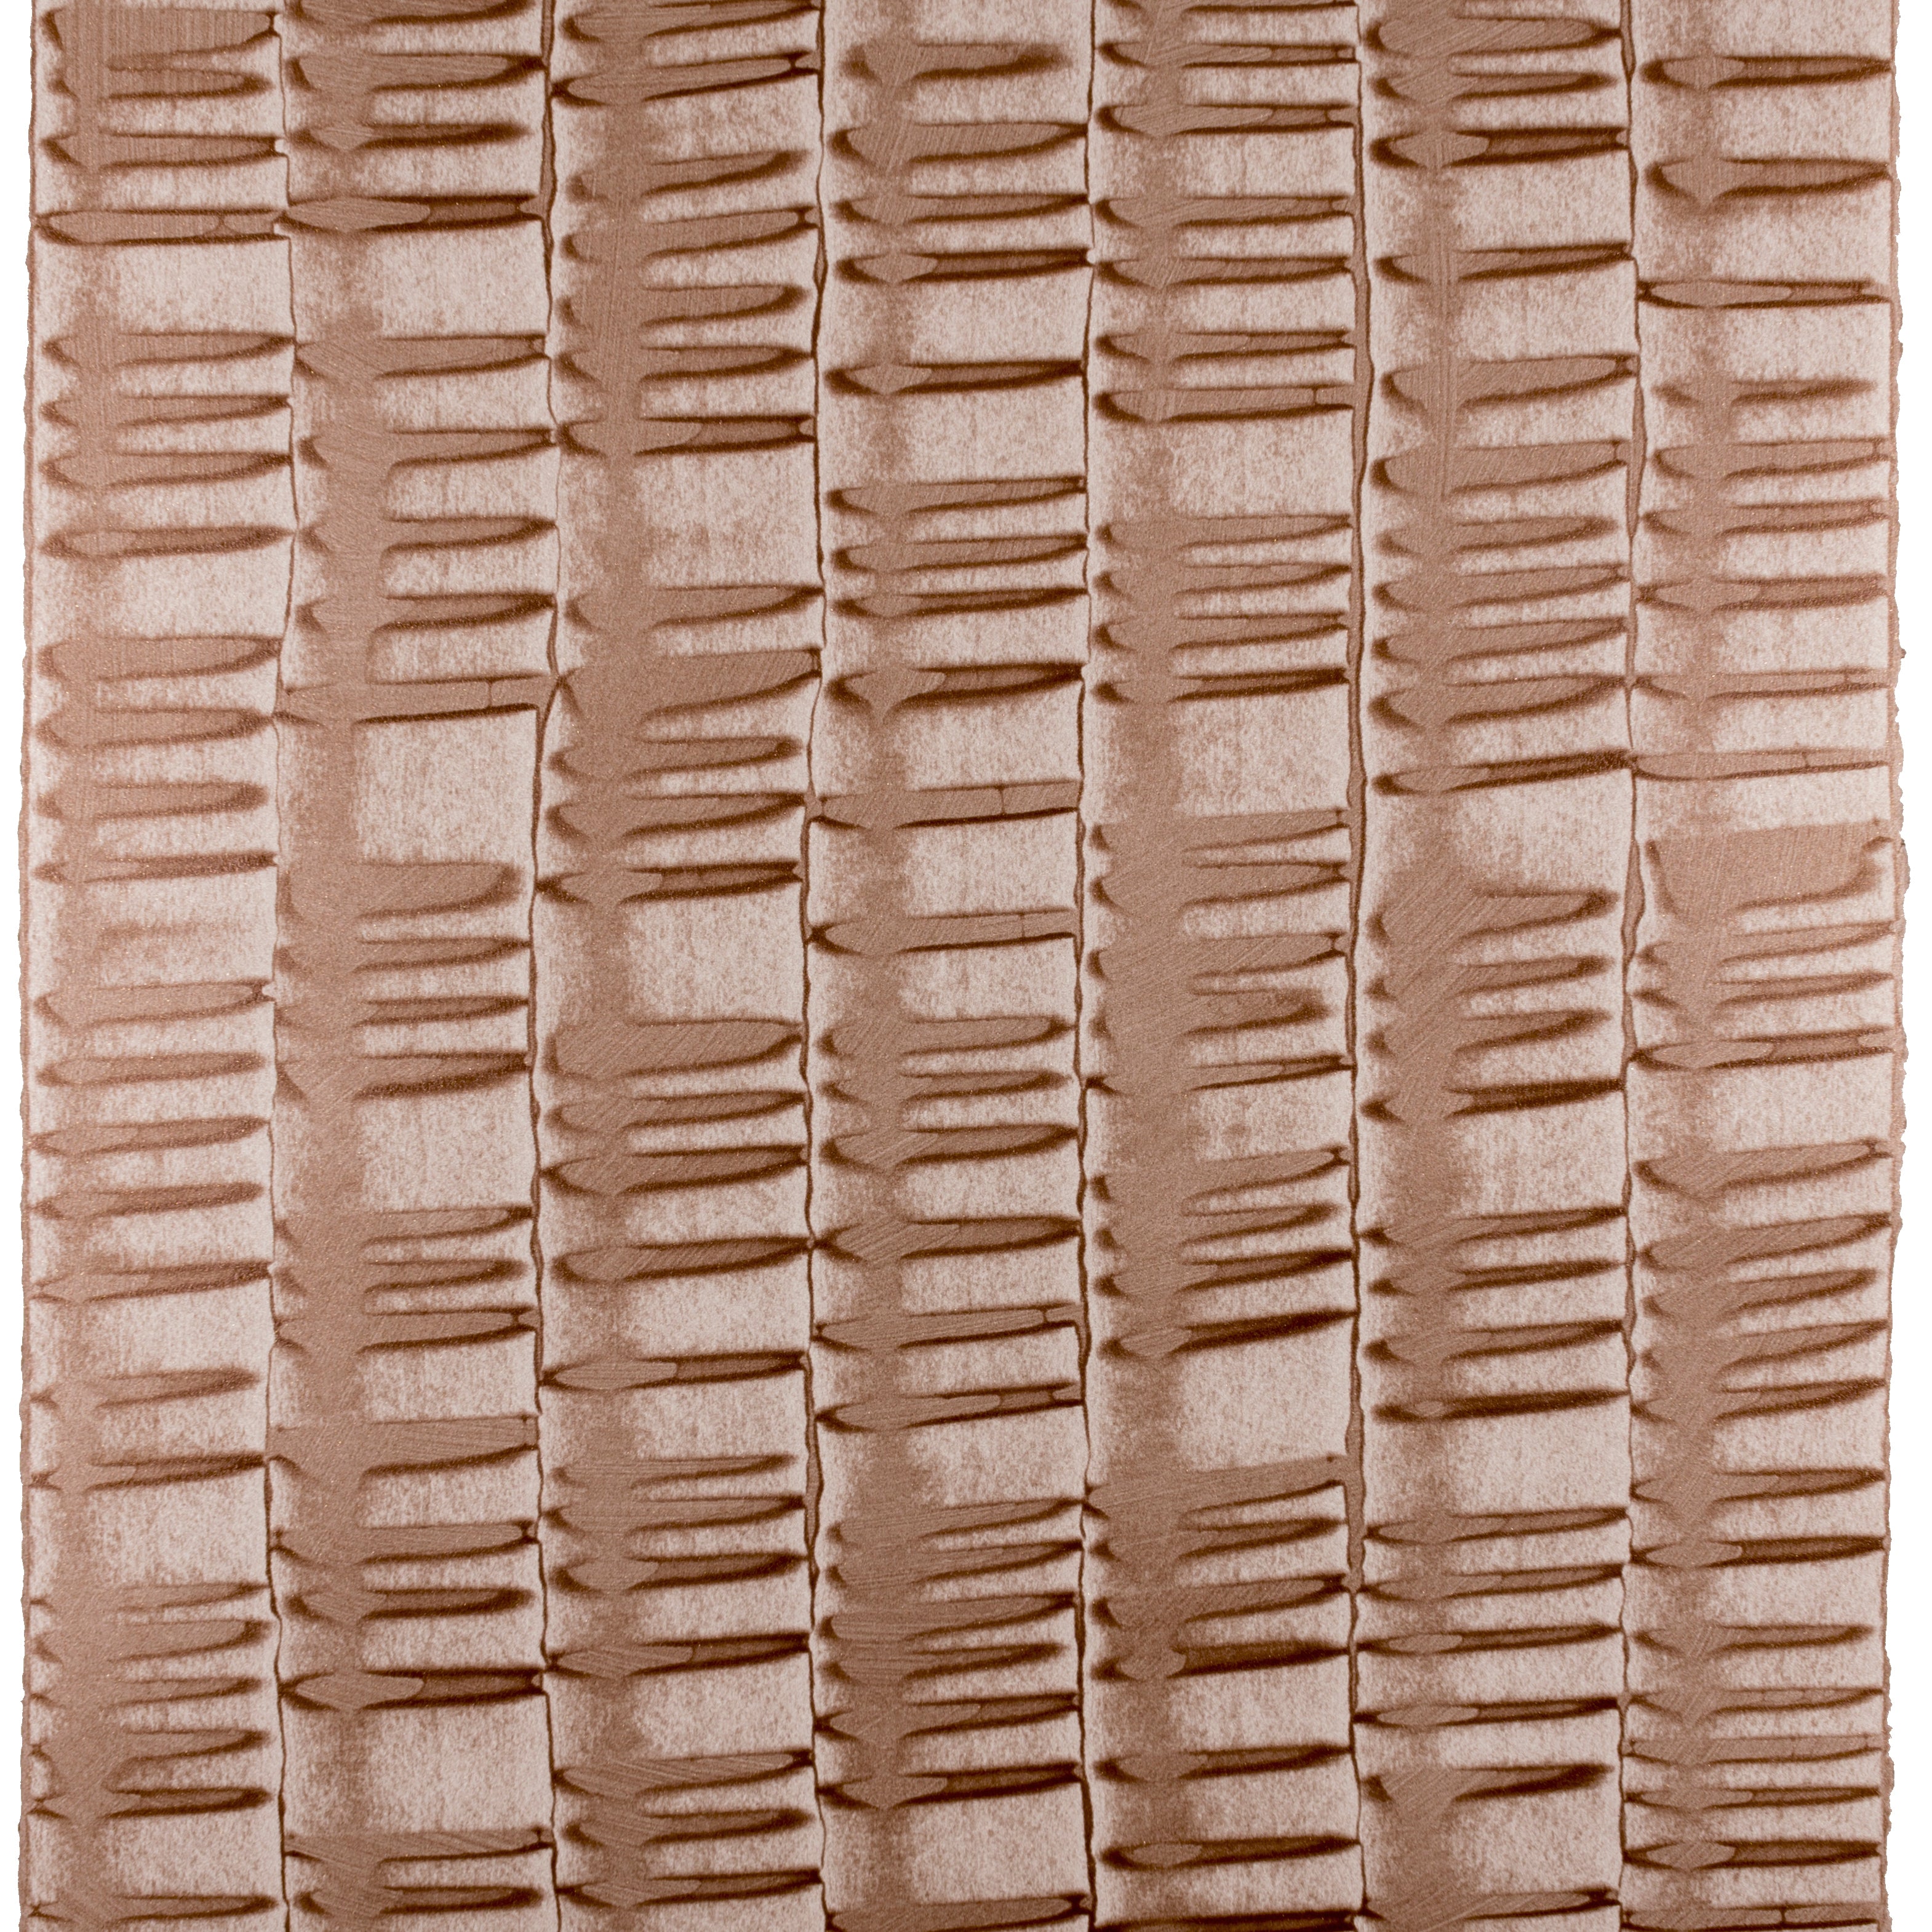 Sheet of hand-painted wallpaper with an undulating ribbon pattern in copper.